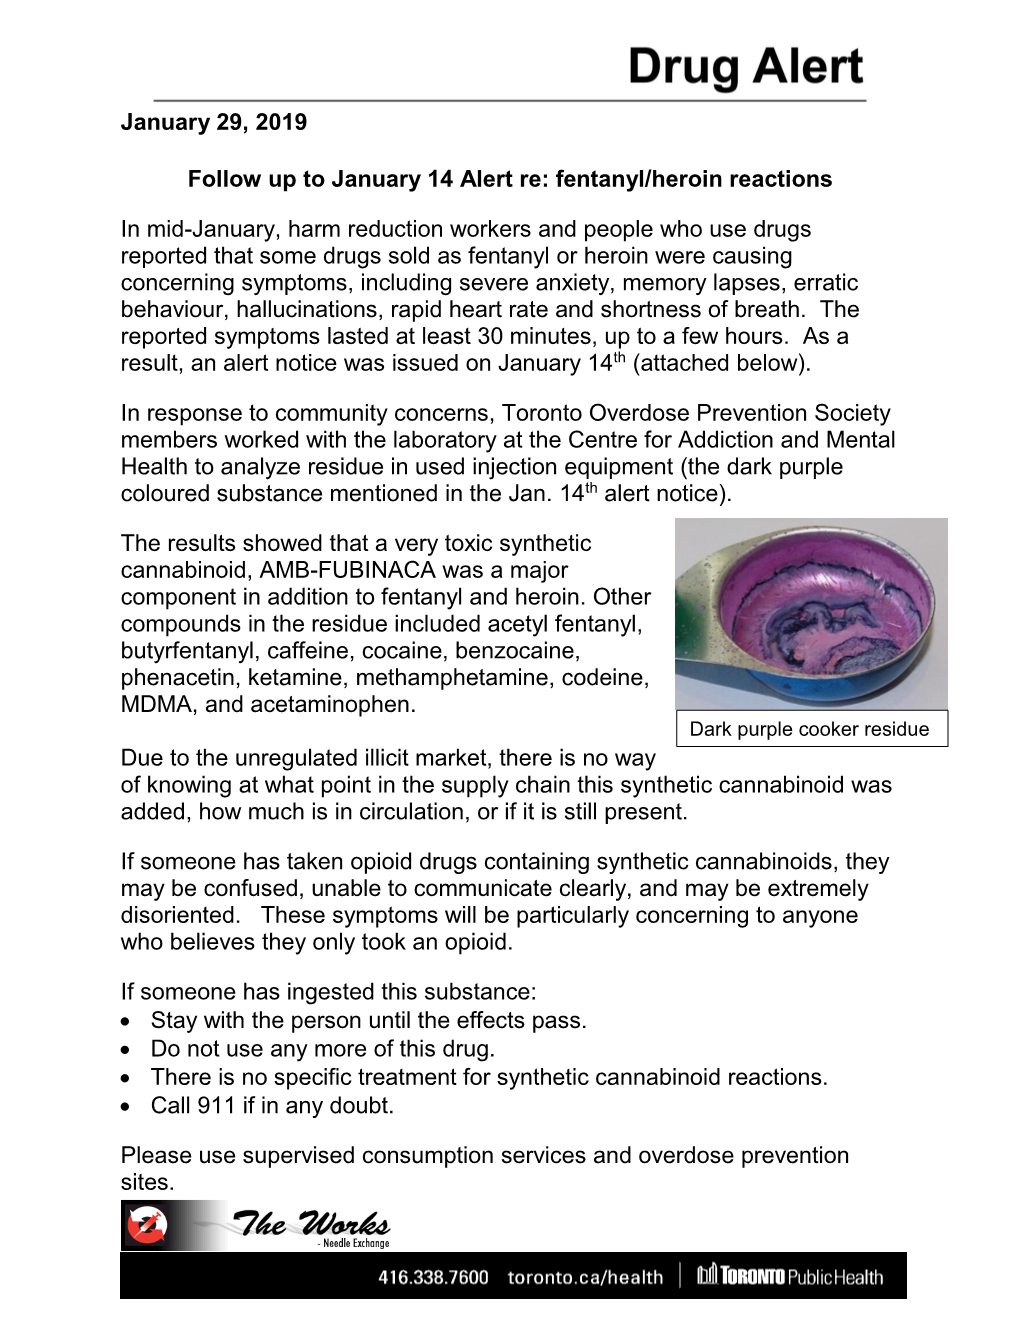 Follow up to January 14 Alert Re: Fentanyl/Heroin Reactions